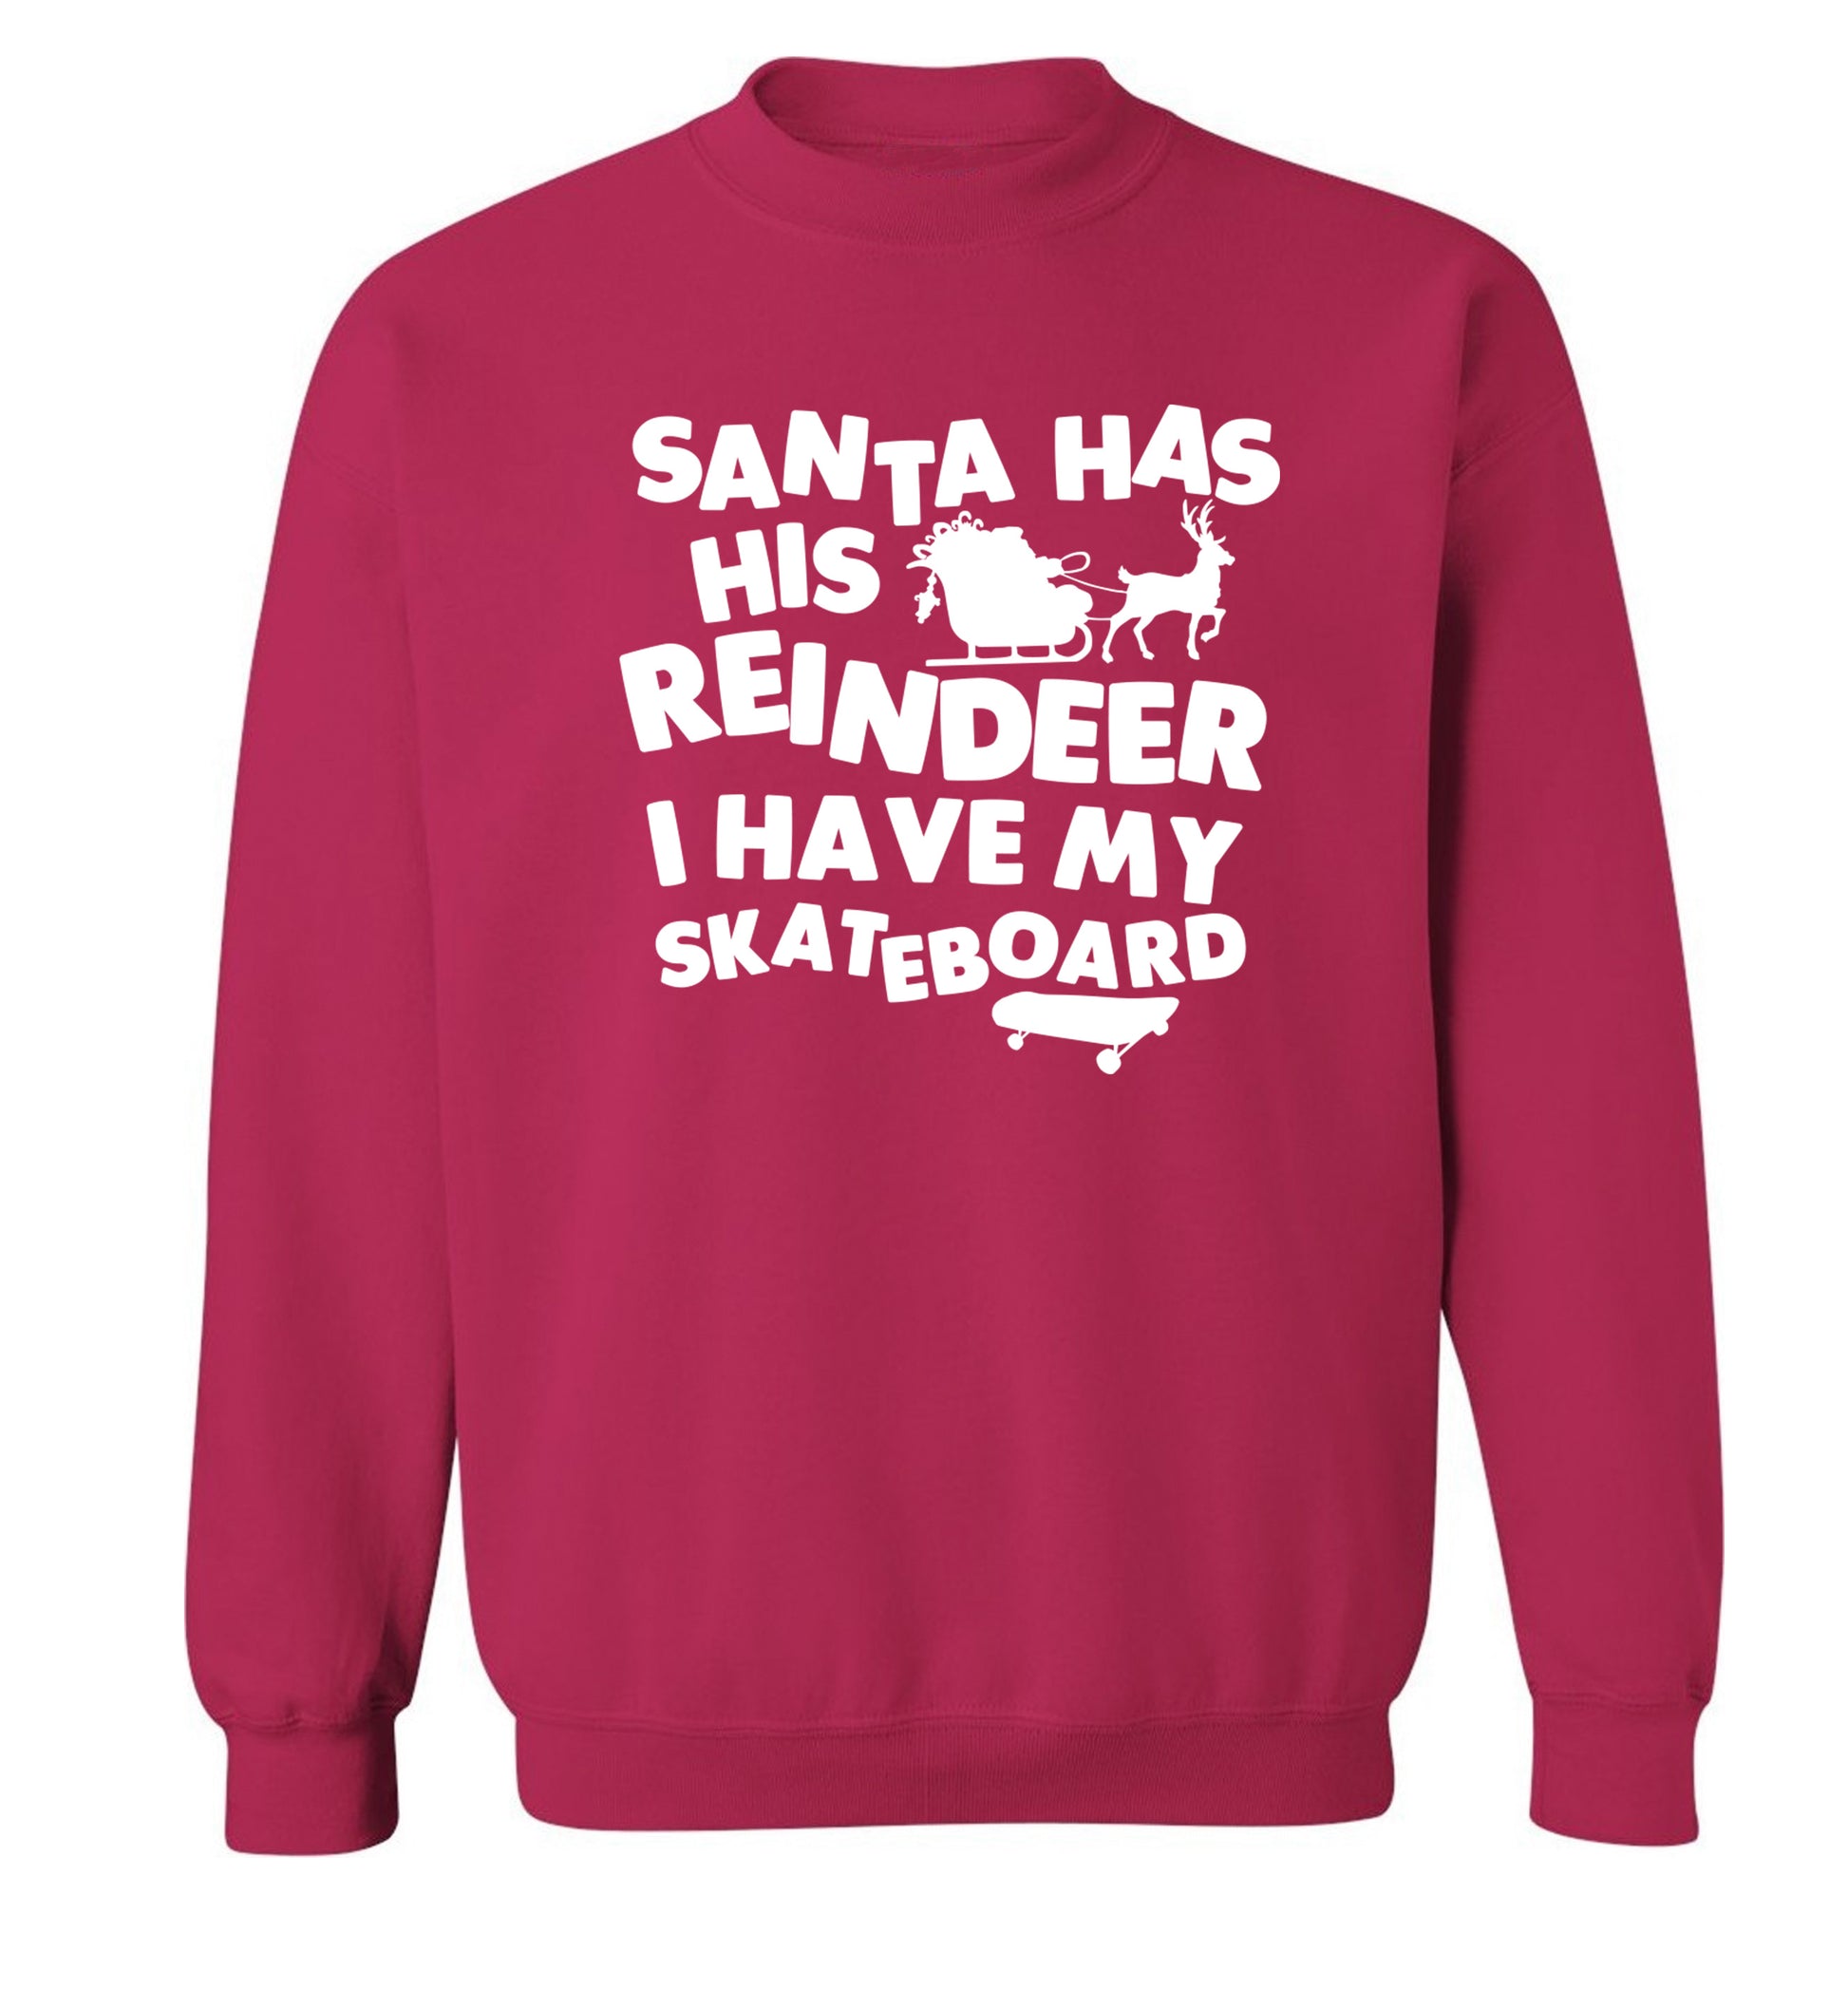 Santa has his reindeer I have my skateboard Adult's unisex pink Sweater 2XL